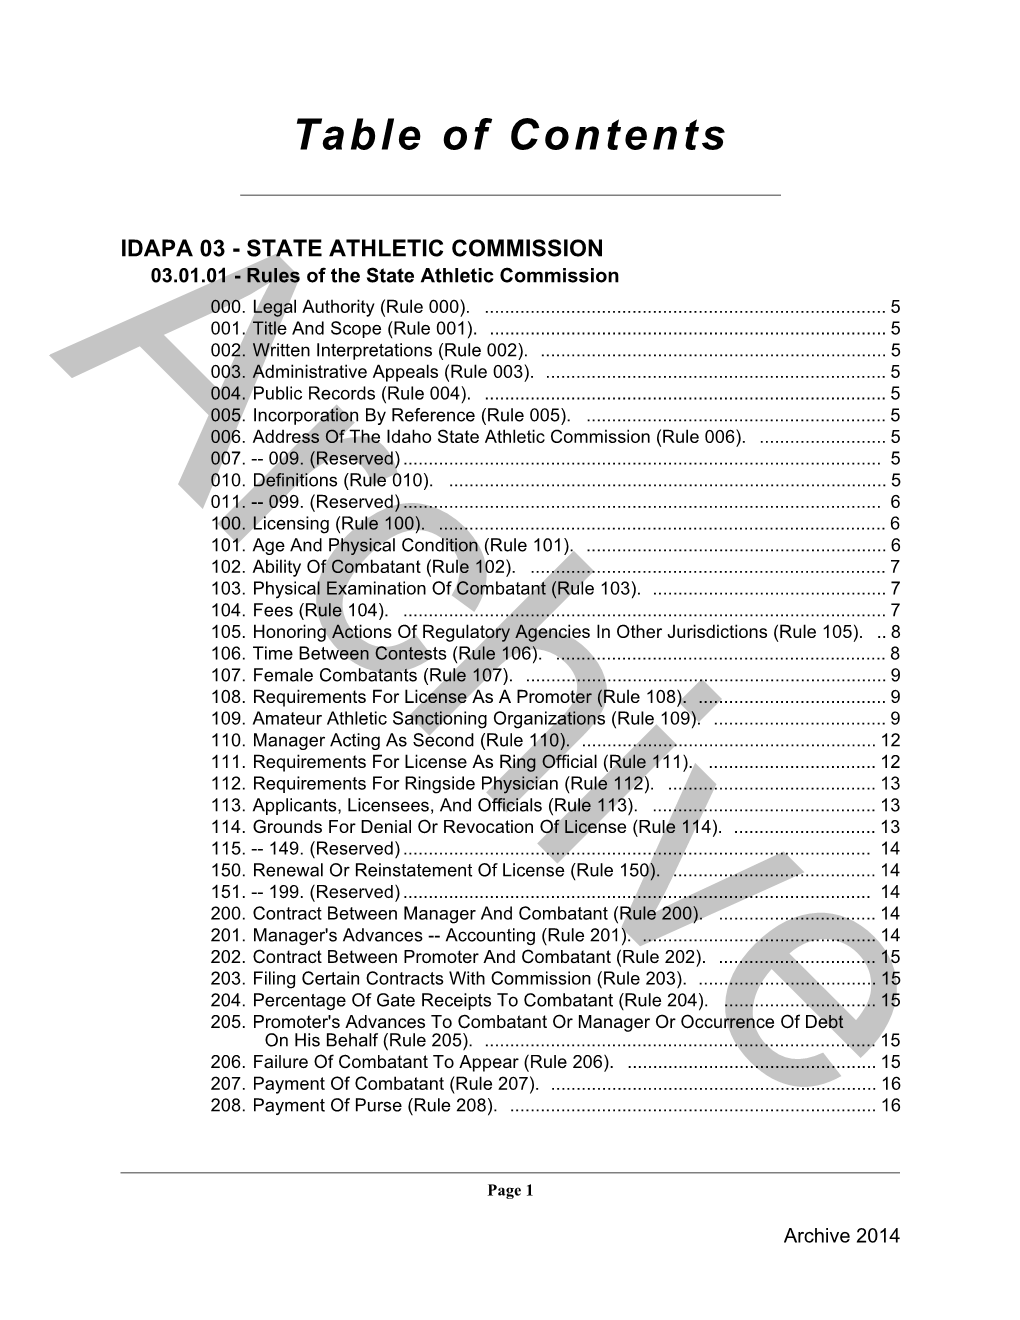 03.01.01, Rules of the Idaho State Athletic Commission